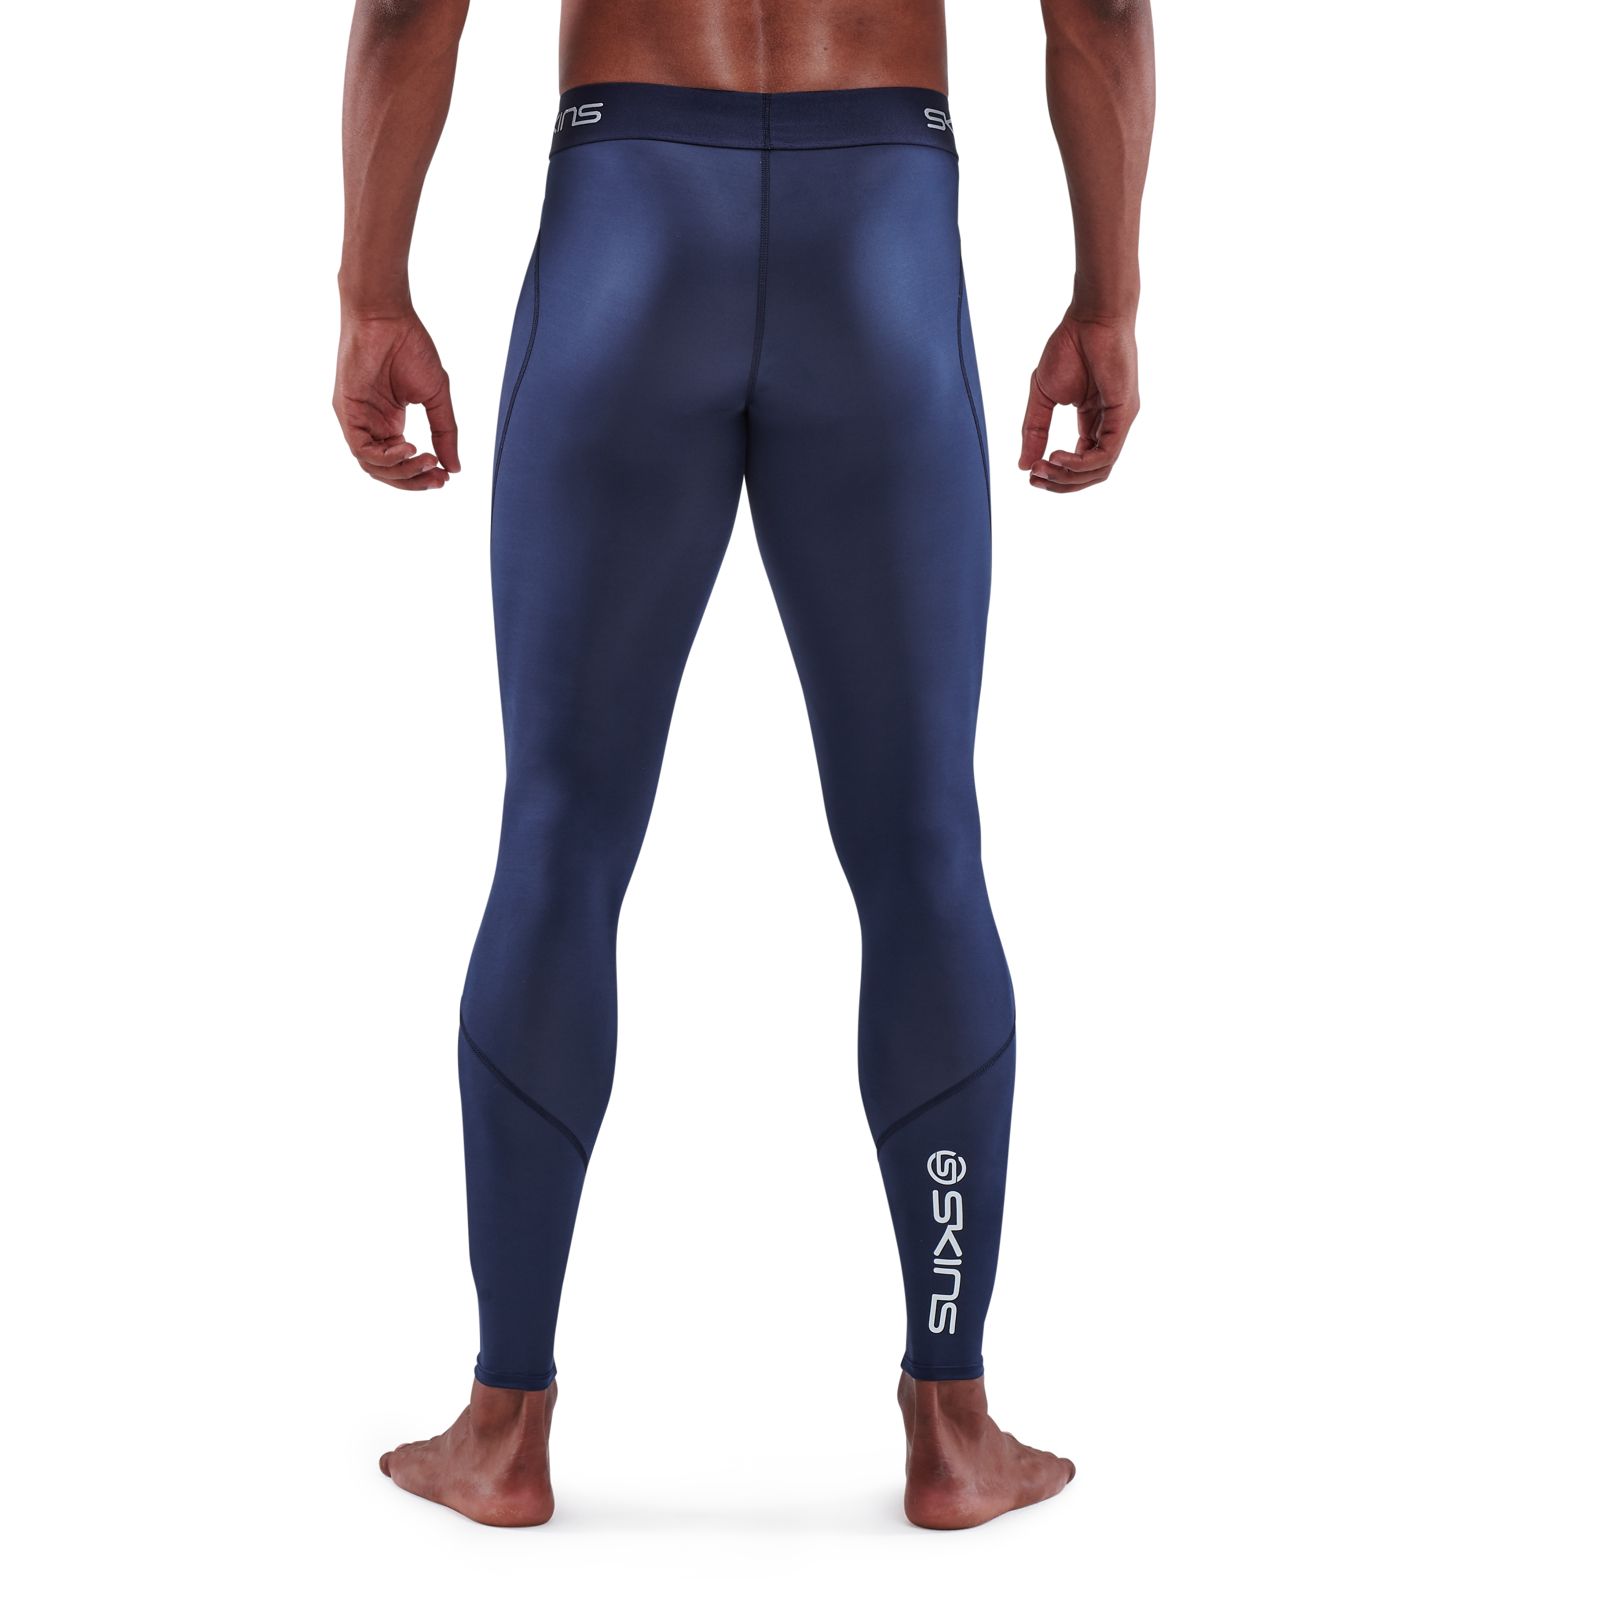 TRAIL RUNNING CLOTHING & SHOES Skins DNAMIC THERMAL - Tights - Men's - navy  blue/bright blue - Private Sport Shop